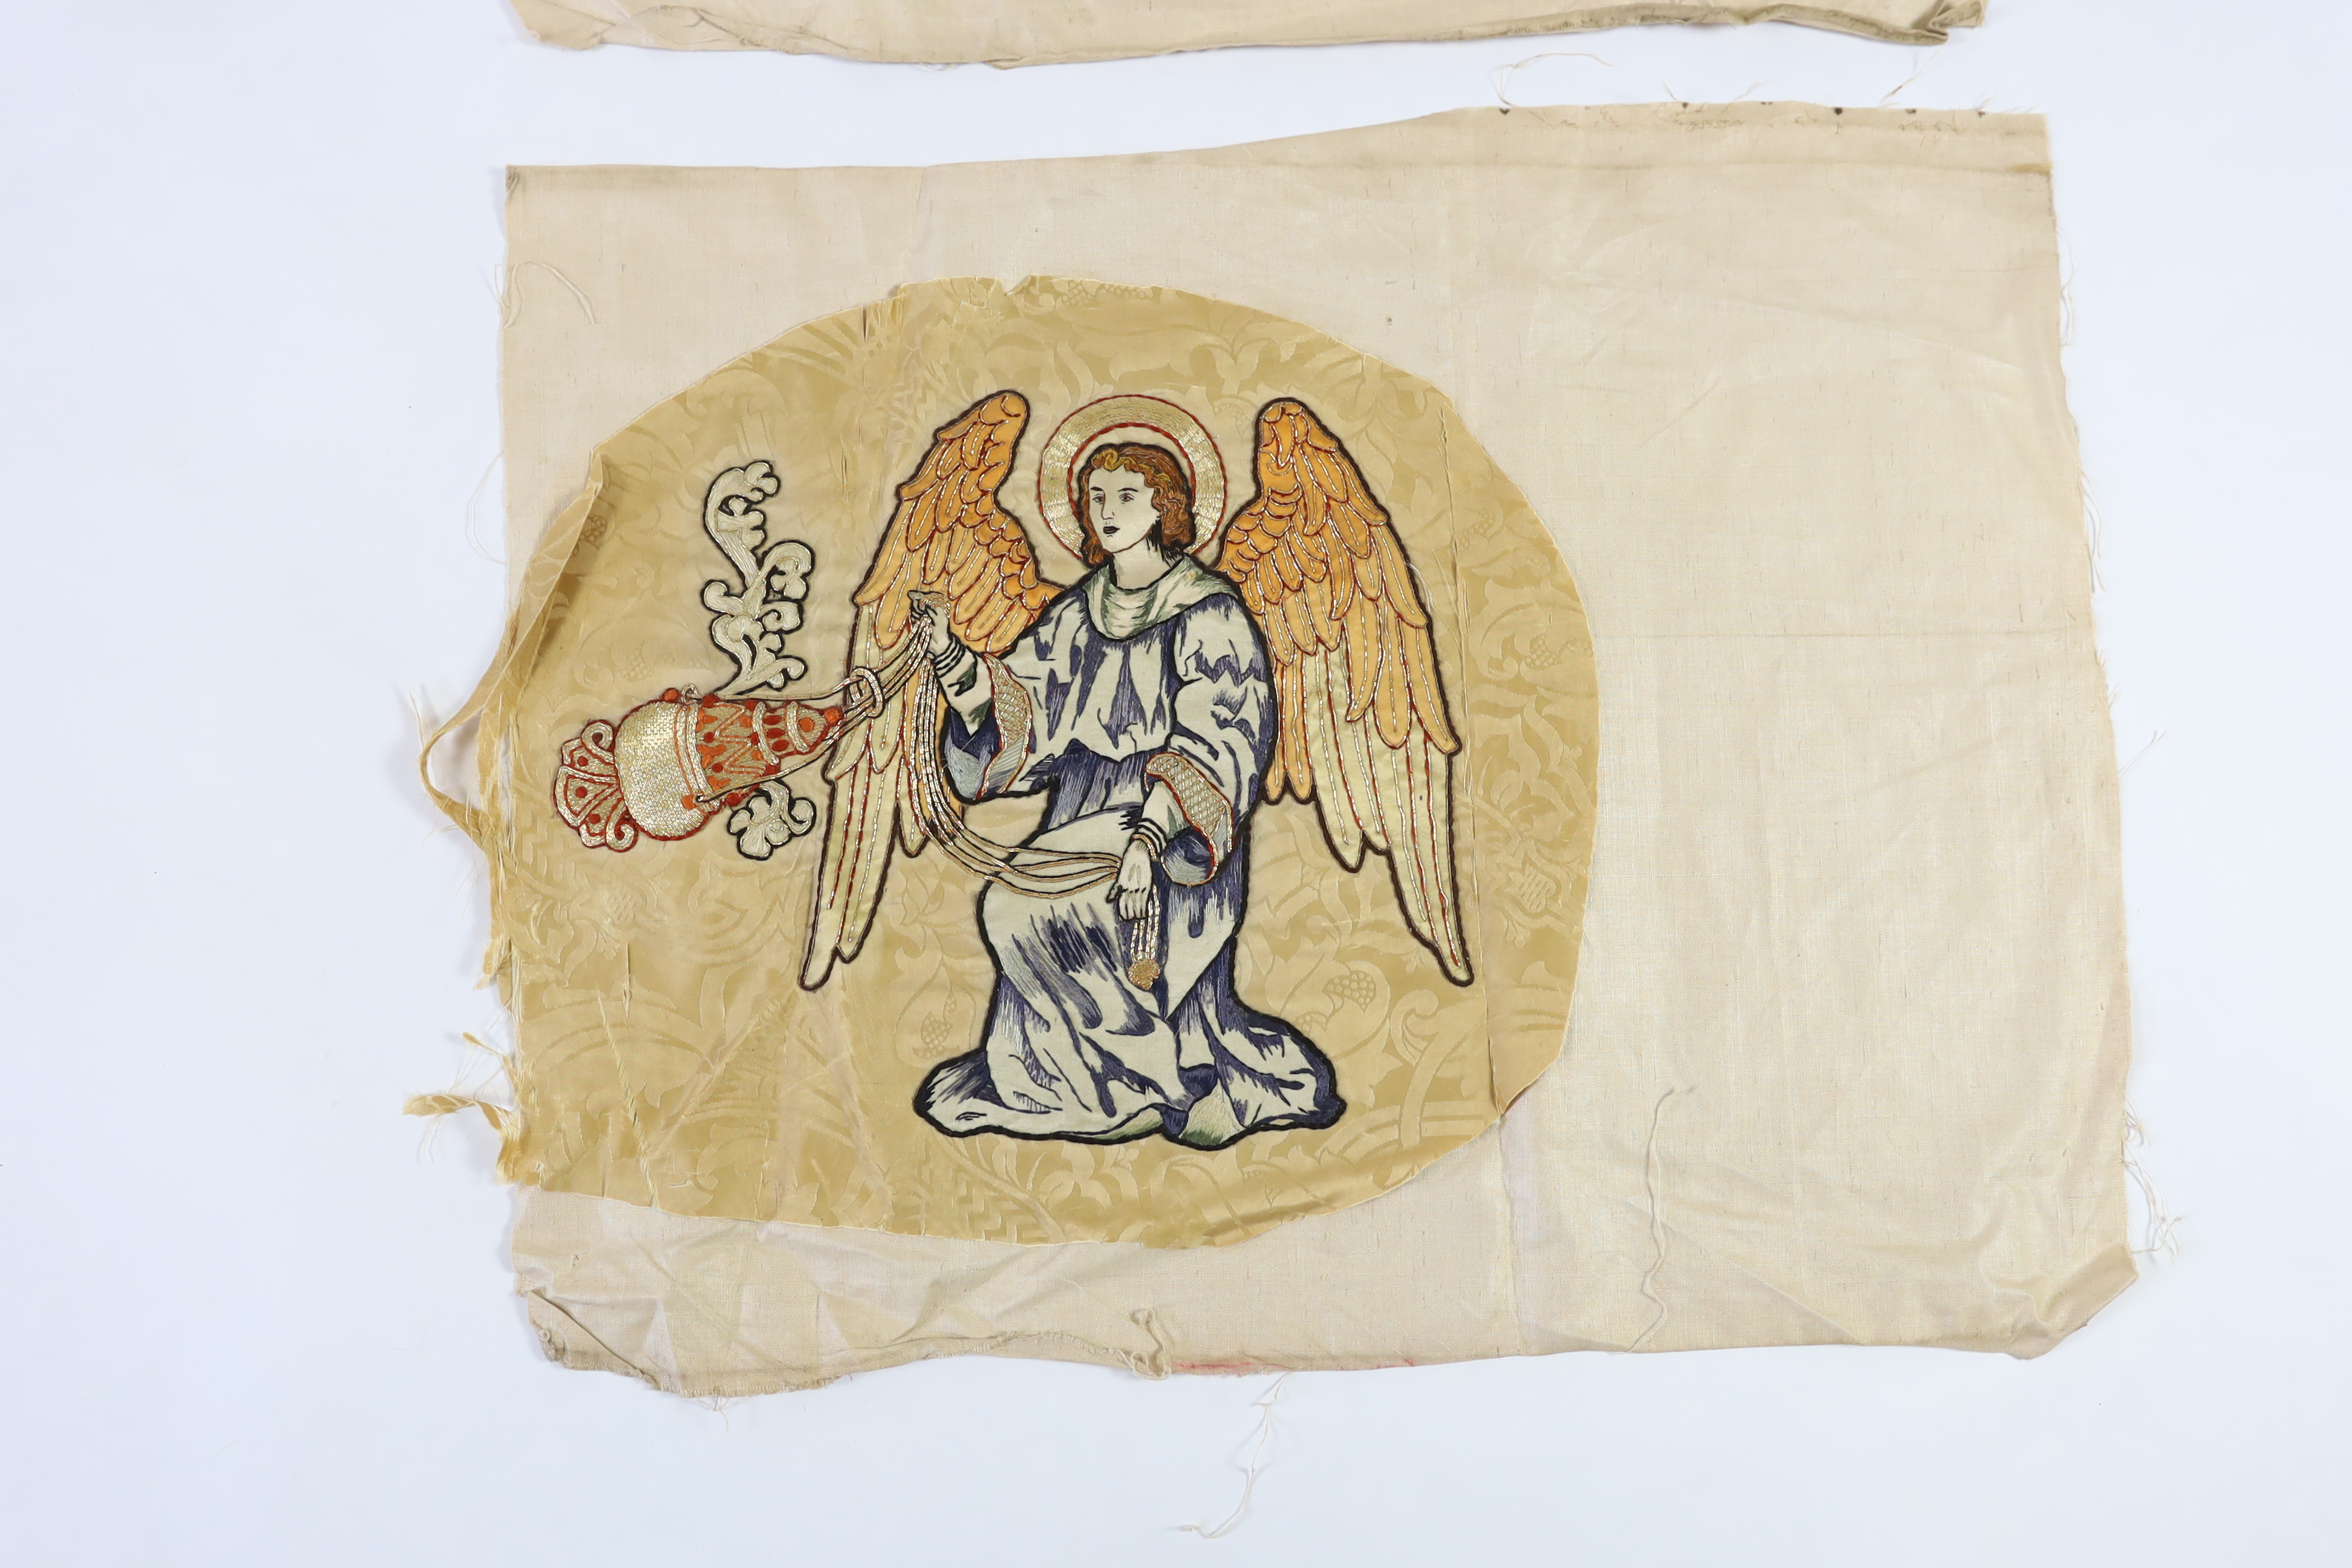 Two 1880-90’s angelic embroideries, appliquéd onto silk damask, originally from an alter frontal, the appliqués being silk embroidered with gold thread highlights of angels with thurible to cleanse with incense, appliqué